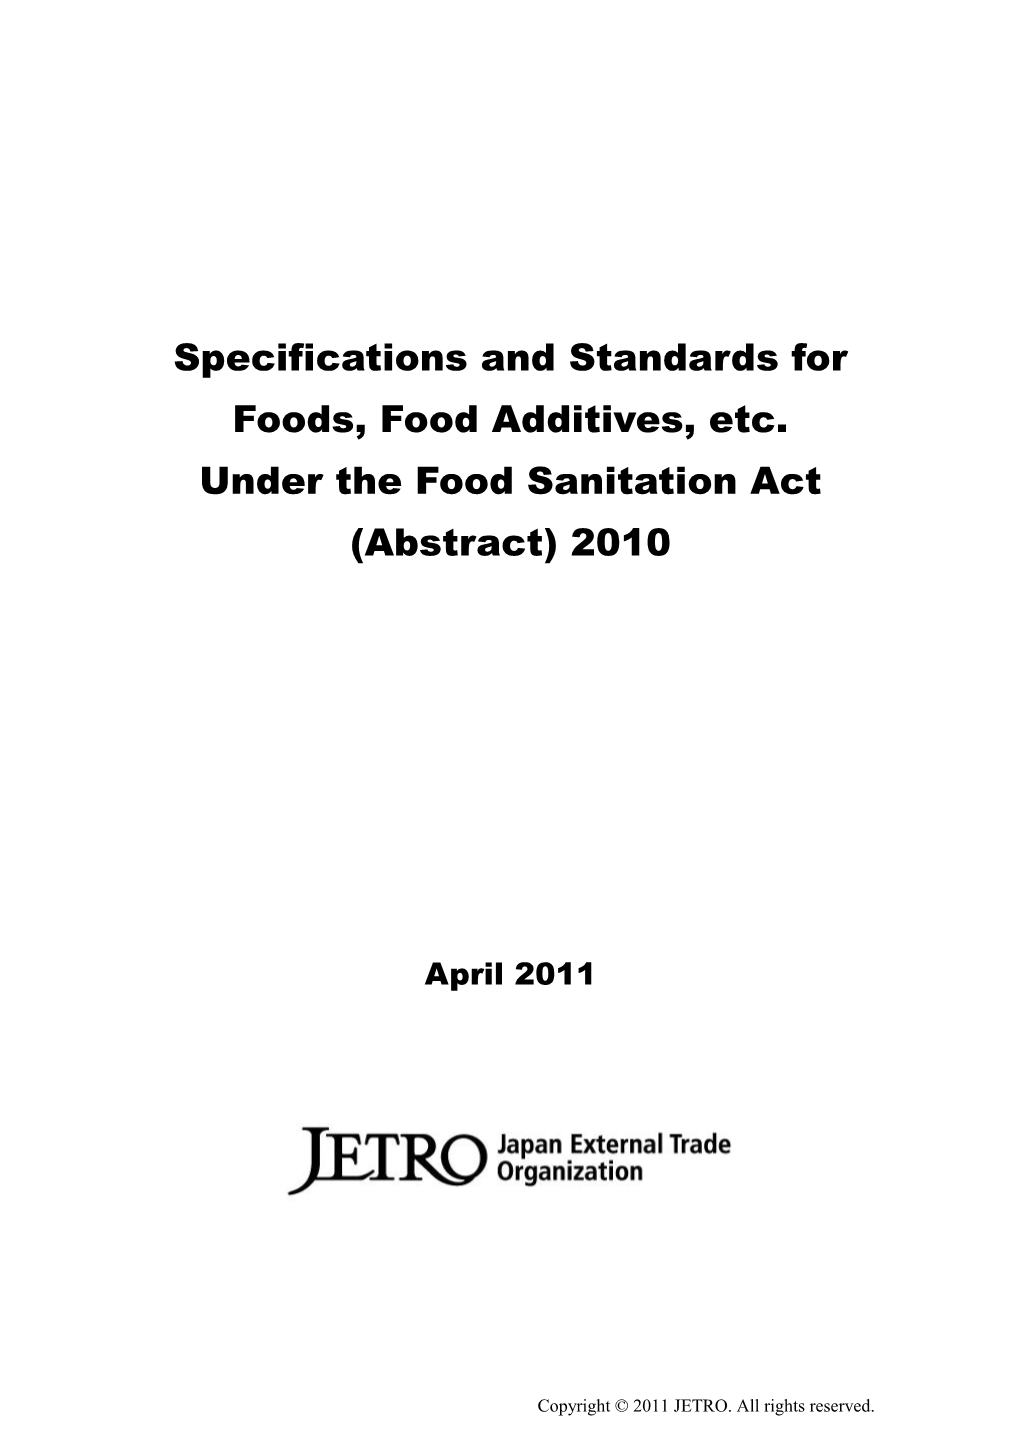 Specifications and Standards for Foods, Food Additives, Etc. Under the Food Sanitation Act (Abstract) 2010